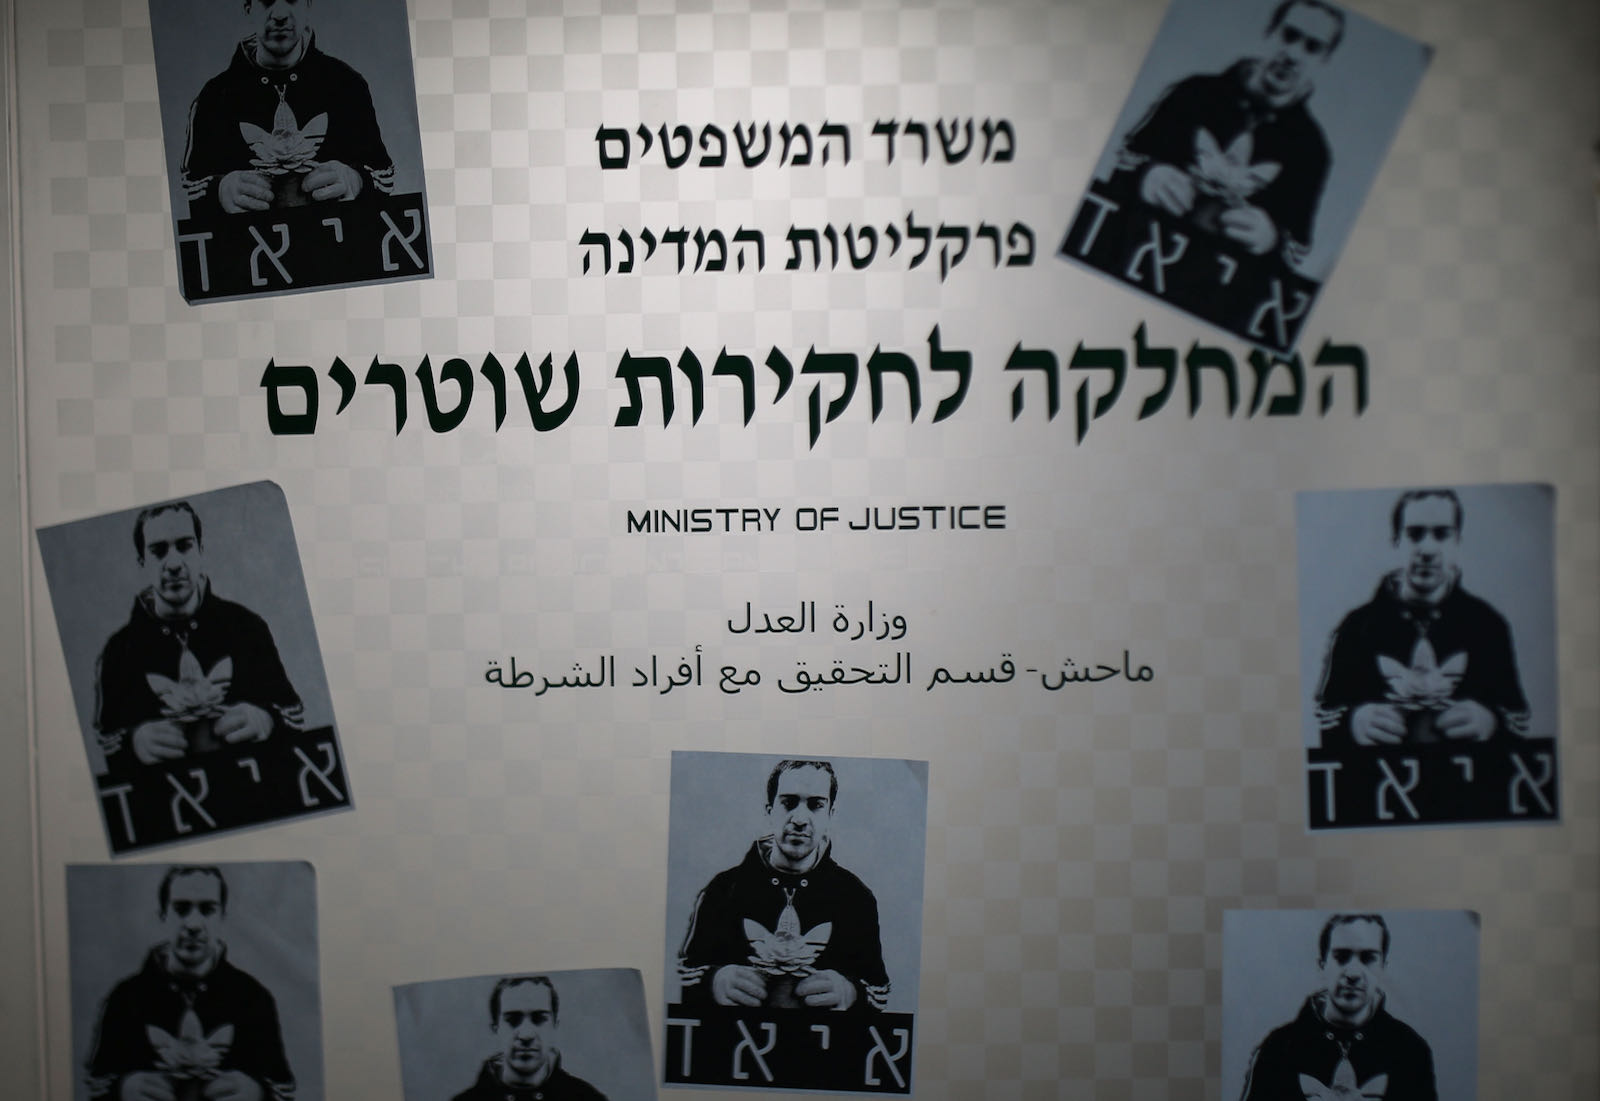 Stickers commemorating Eyad al-Hallaq posted by protesters on the walls of a Ministry of Justice building